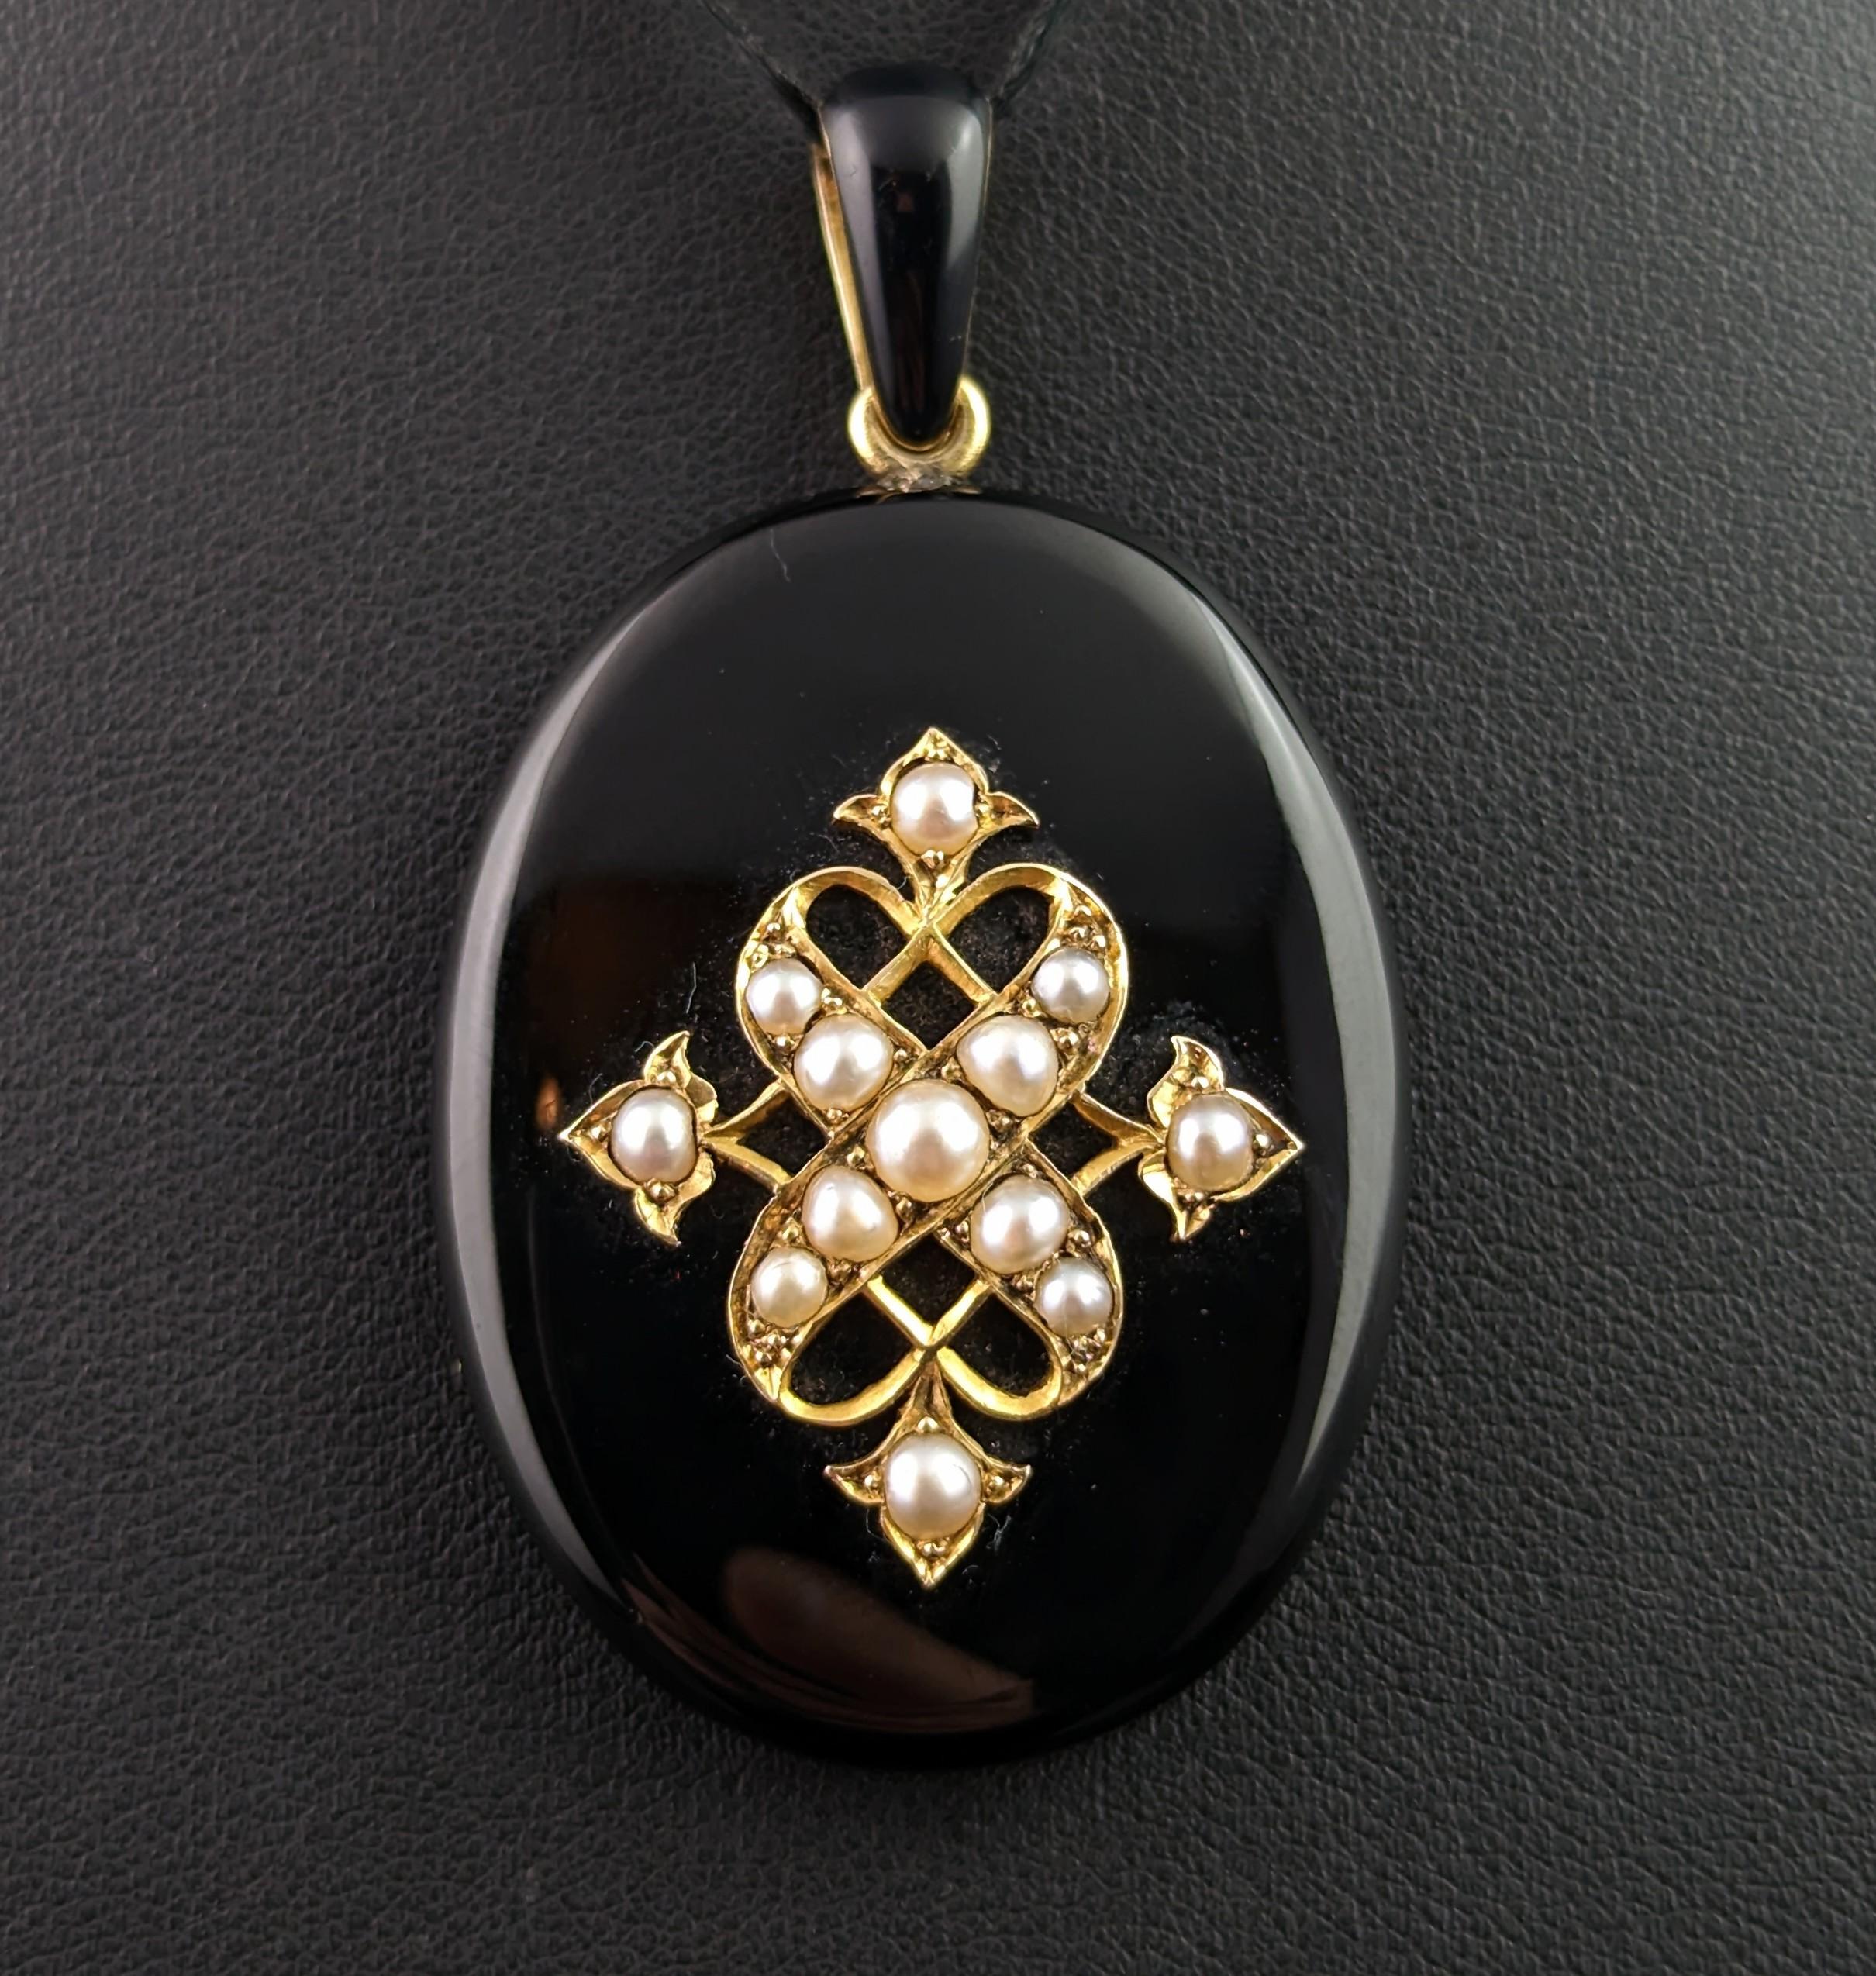 Now this a locket style that I will never tire of seeing, an impeccable antique Onyx and Pearl Mourning locket.

So rich and luxurious the body of the locket is made up from smooth, highly polished rich black onyx with a central gold motif that is